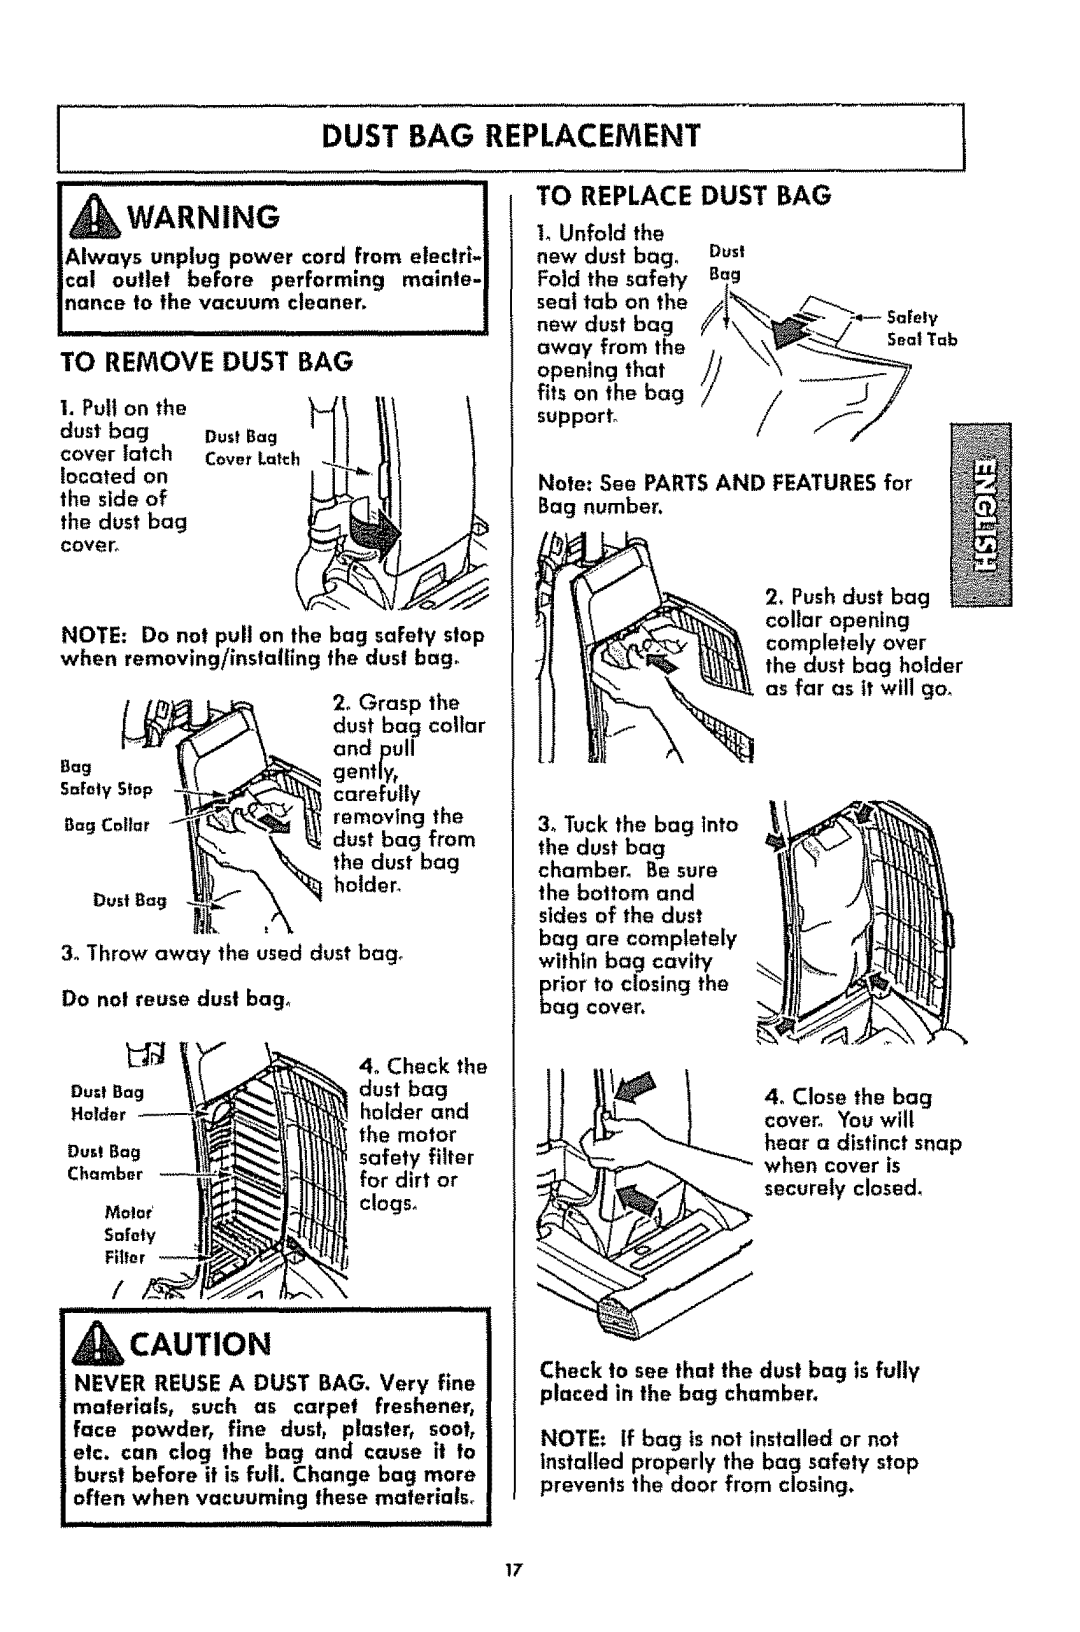 Kenmore 116.3181 Dust Bag Replacement, To Replace Dust Bag, To Remove Dust Bag, c2oGrasp the ust bag collar, removing the 